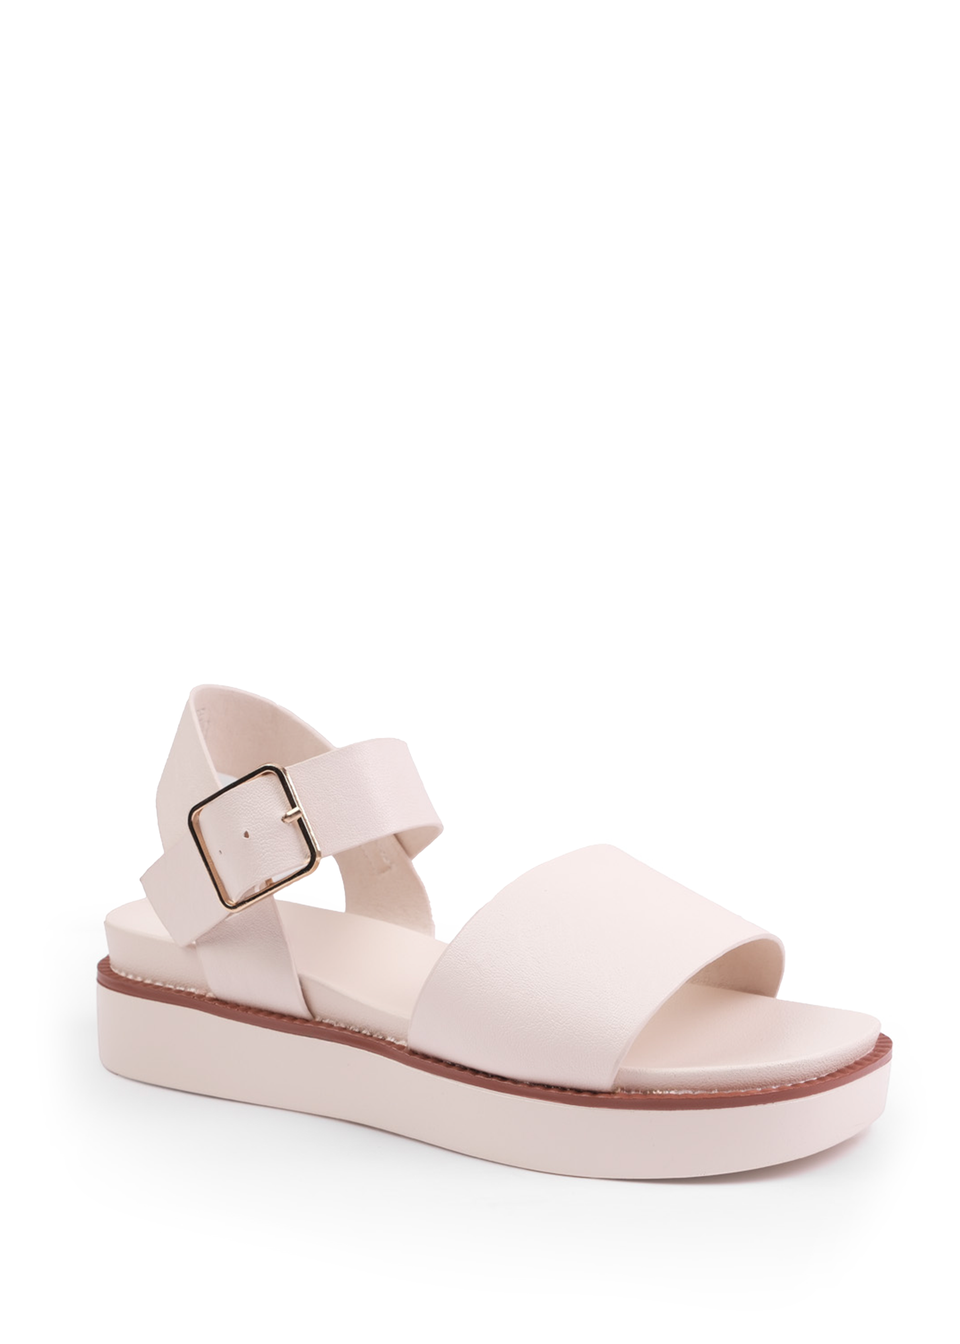 Where's That From Cream Phoenix Wide Fit PU Flat Sandals